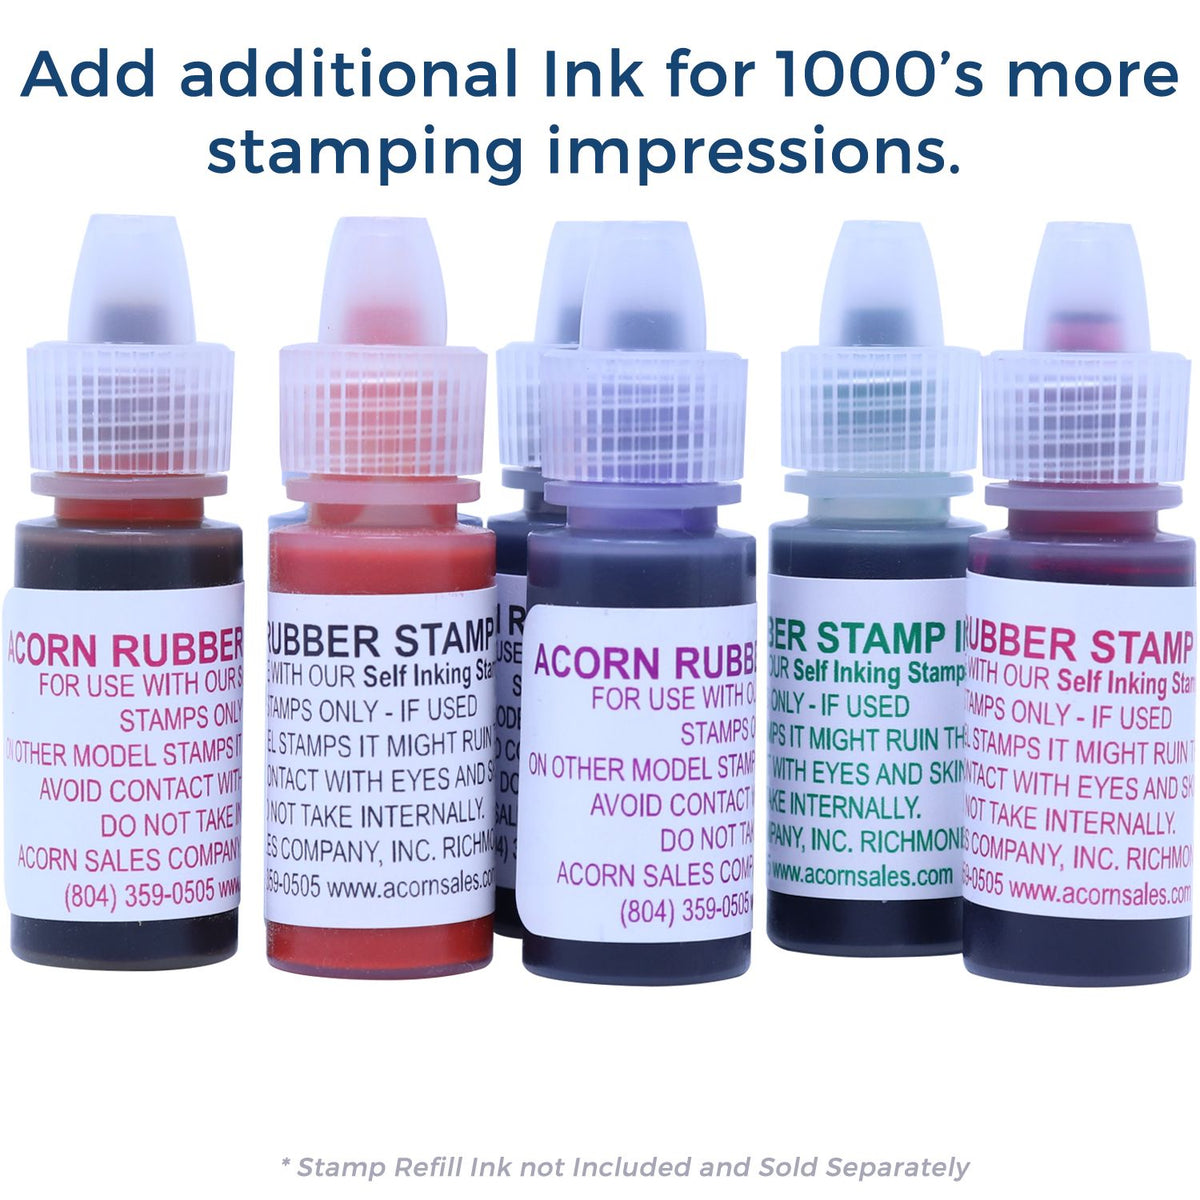 Refill Ink for Self-Inking Round File Copy Stamp Available